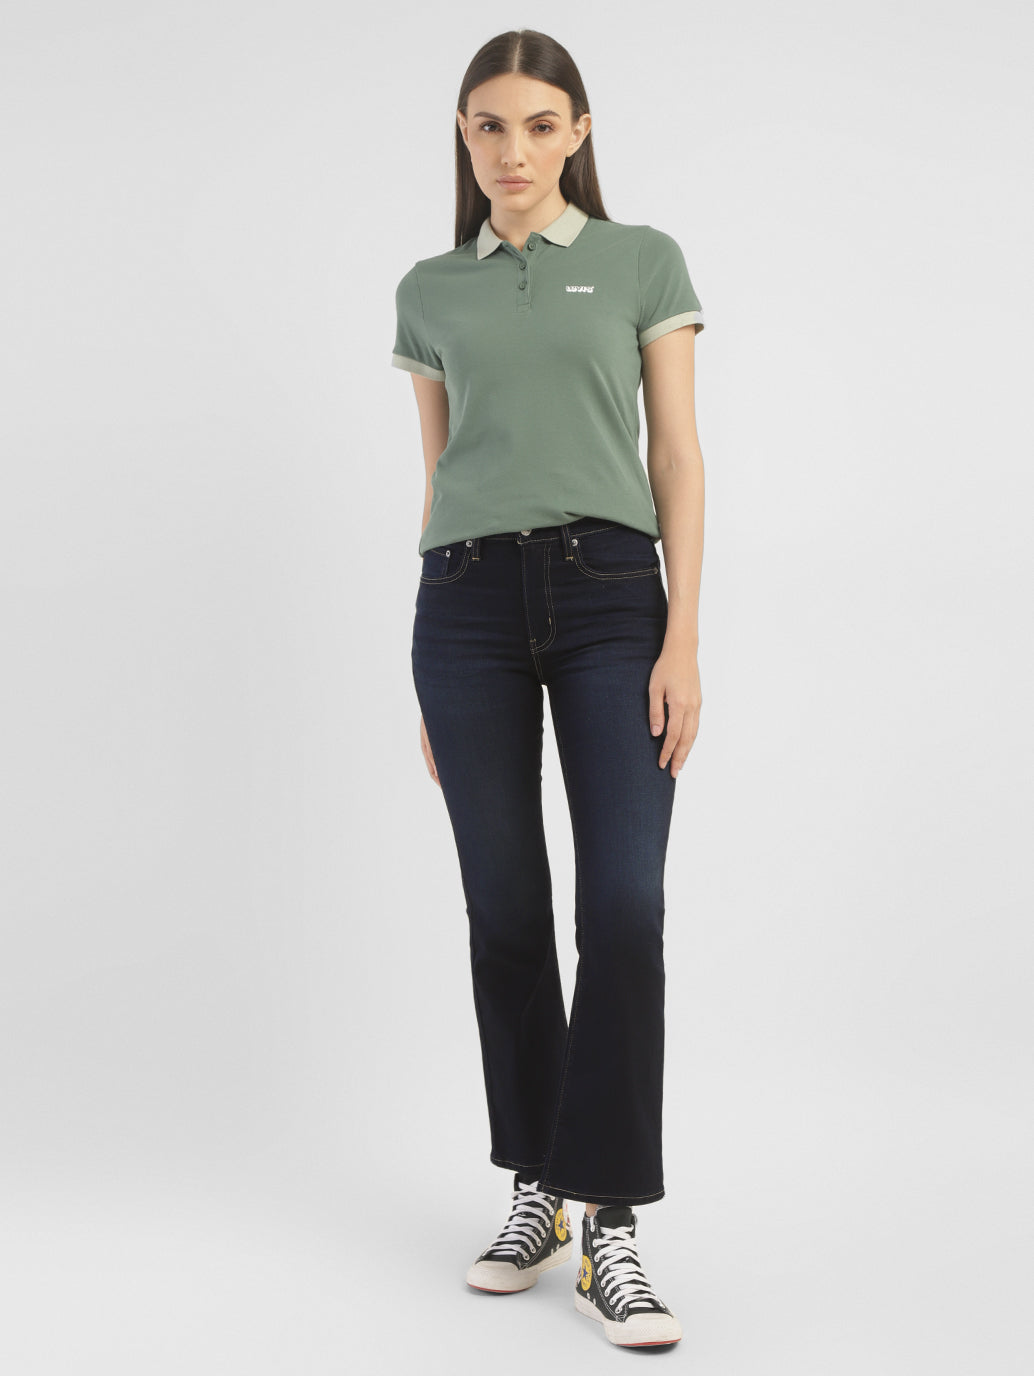 Women's Bootcut Jeans – Levis India Store